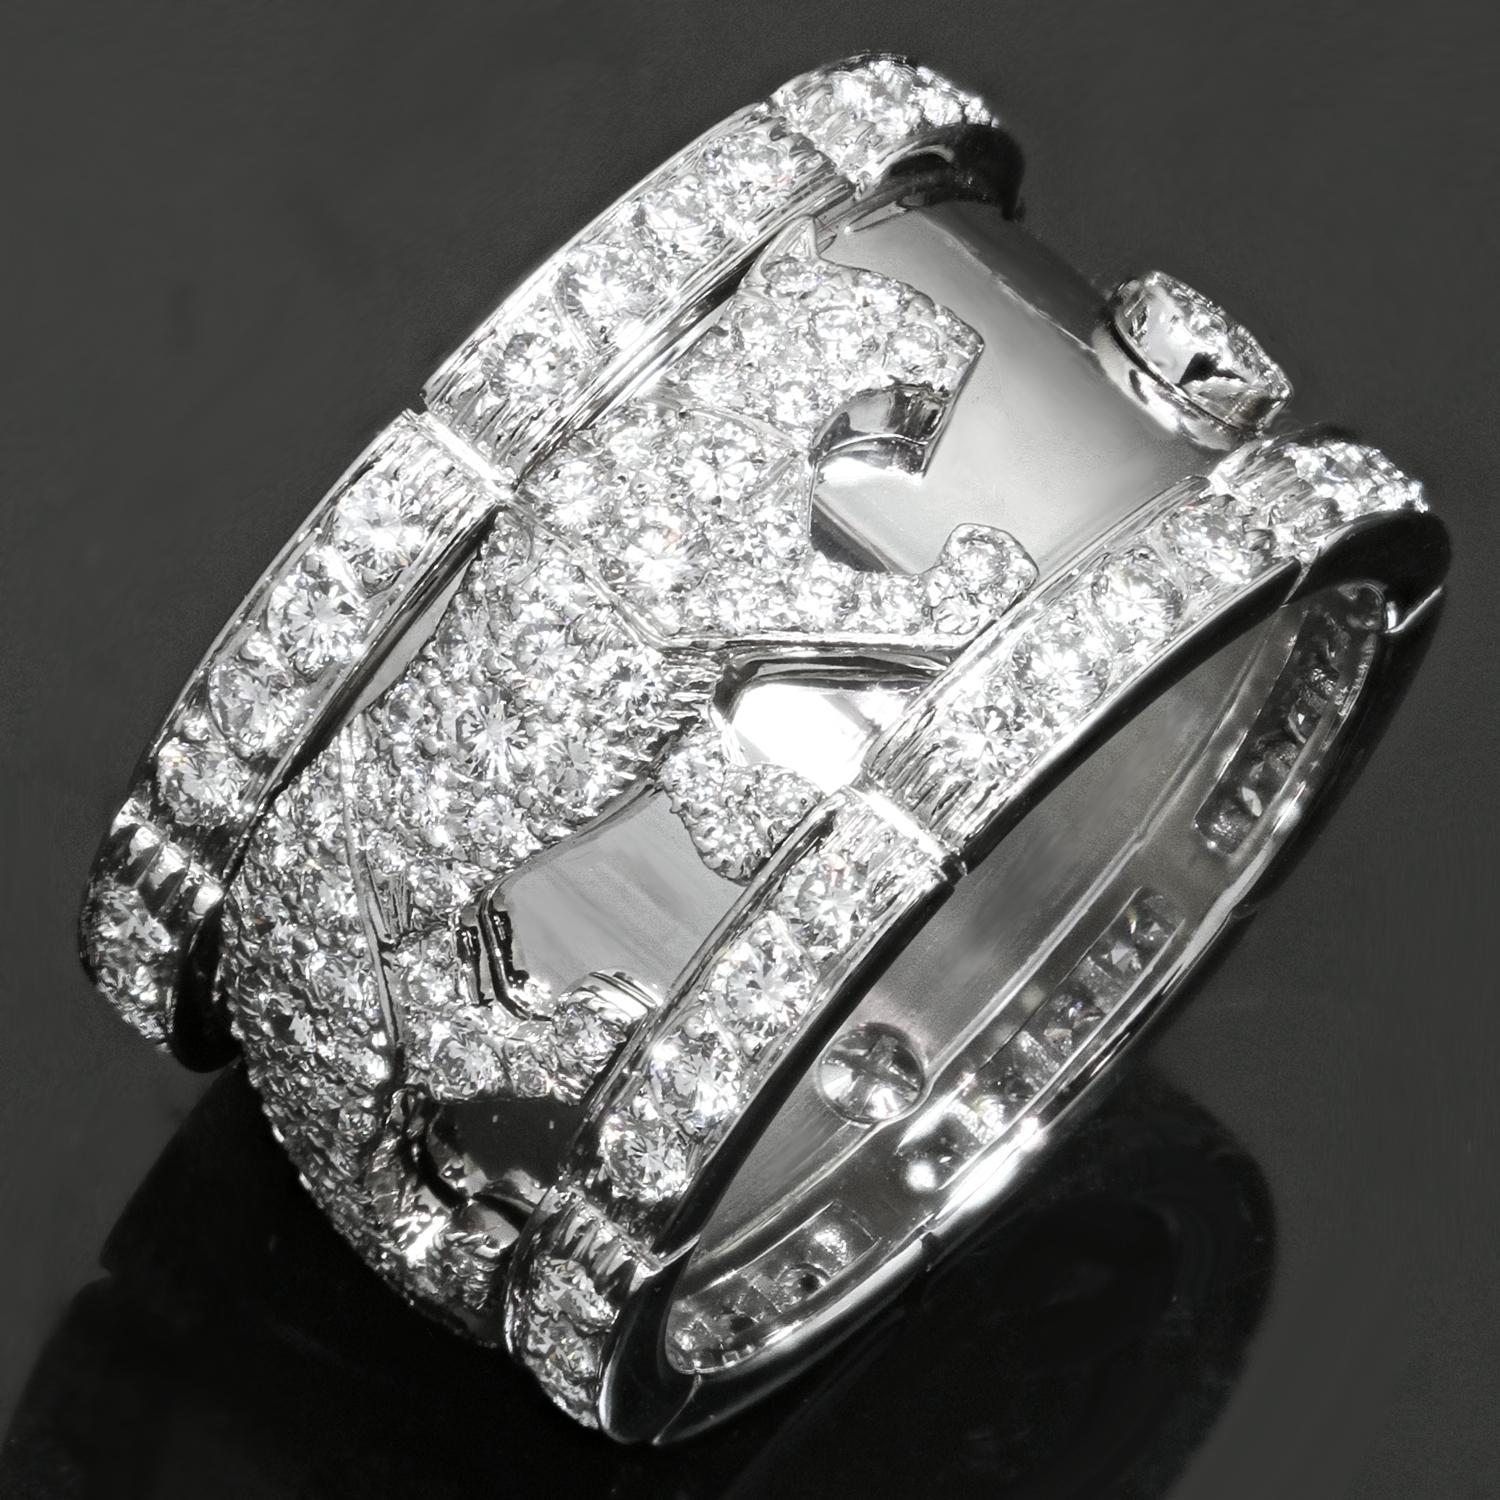 This stunning Cartier Mahango wide band features a design of walking panthers crafted in 18k white gold and pave-set with round brilliant D-F VVS1-VVS2 diamonds weighing an estimated 3.0 carats. Made in France circa 2000s. Measurements: 0.55